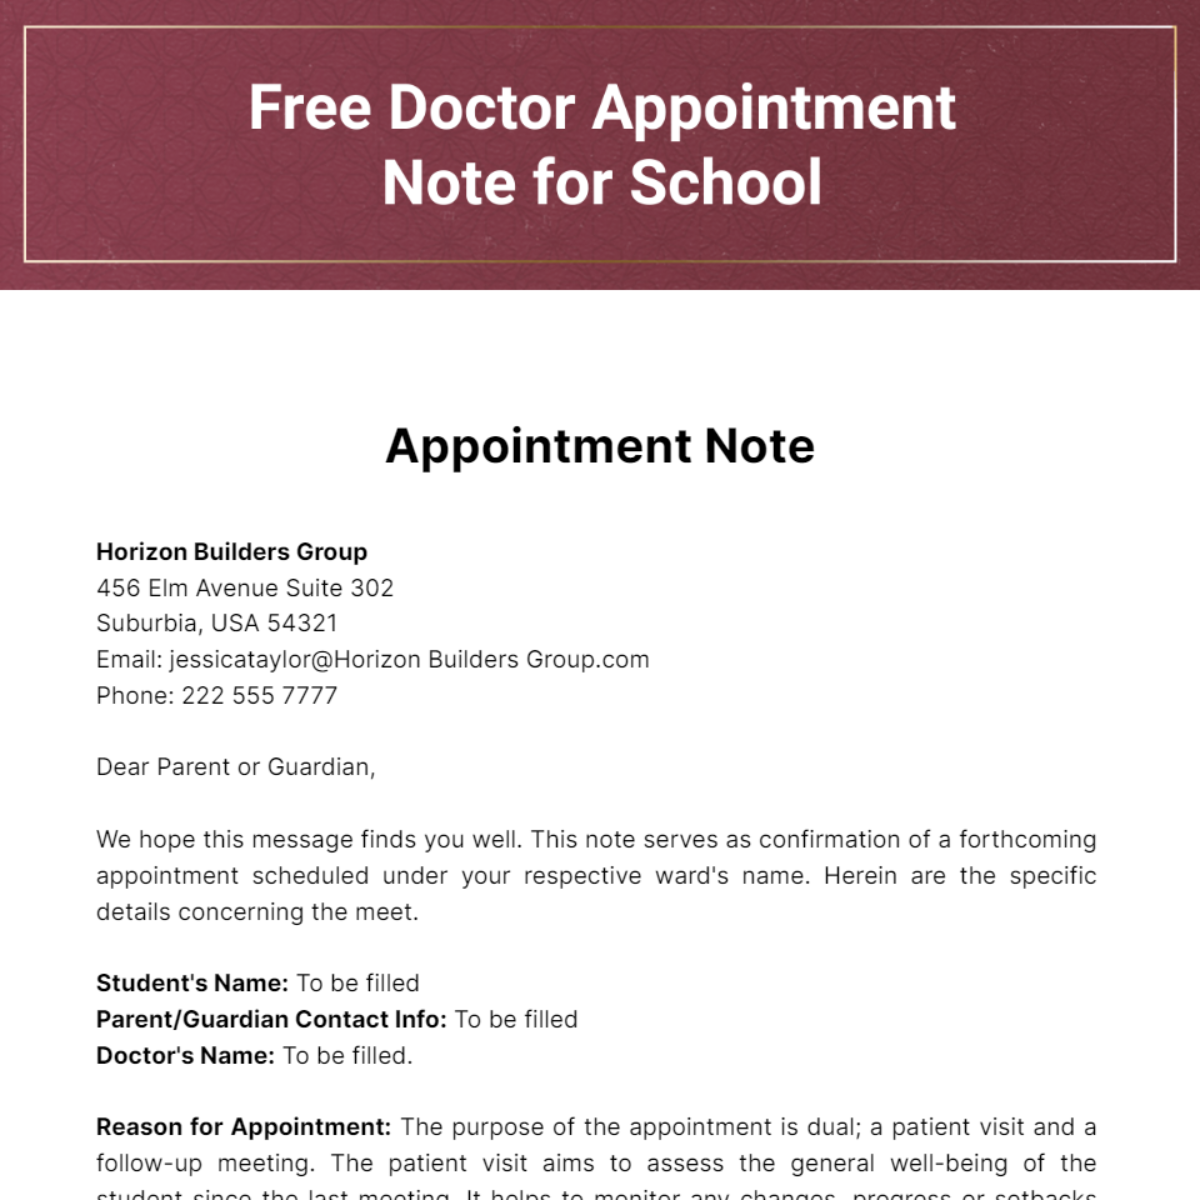 Free Doctor Appointment Note for School Template